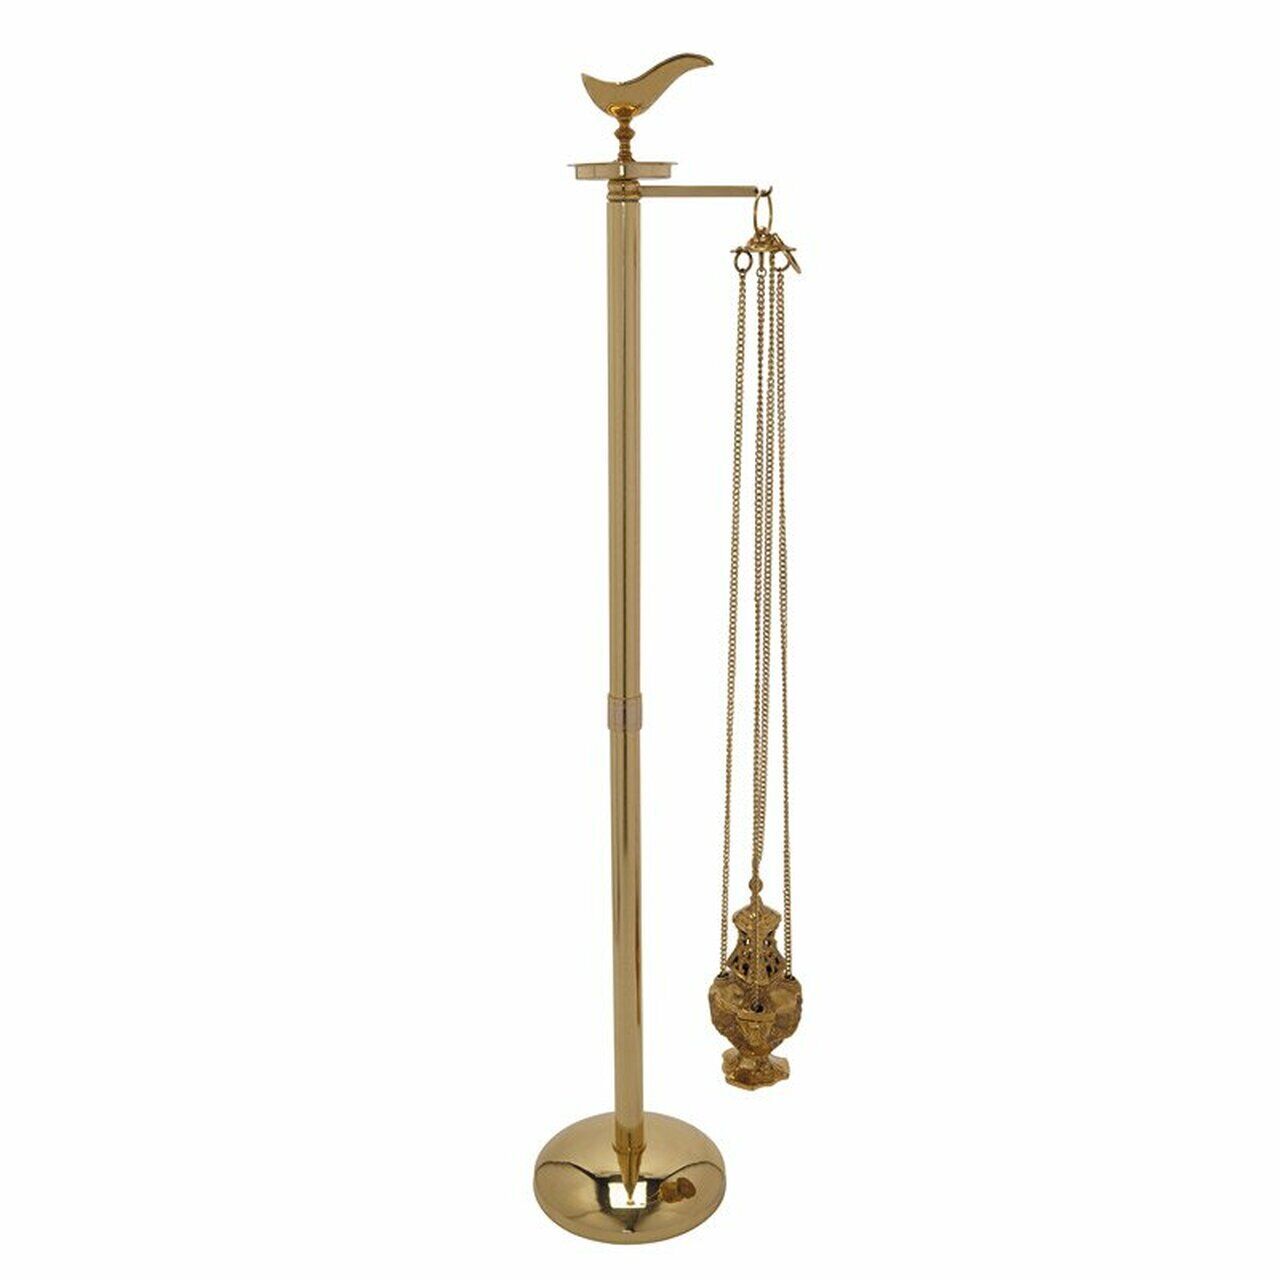 Polished Brass Round Base Censer and Boat Stand for Churches or Sanctuary, 51 In